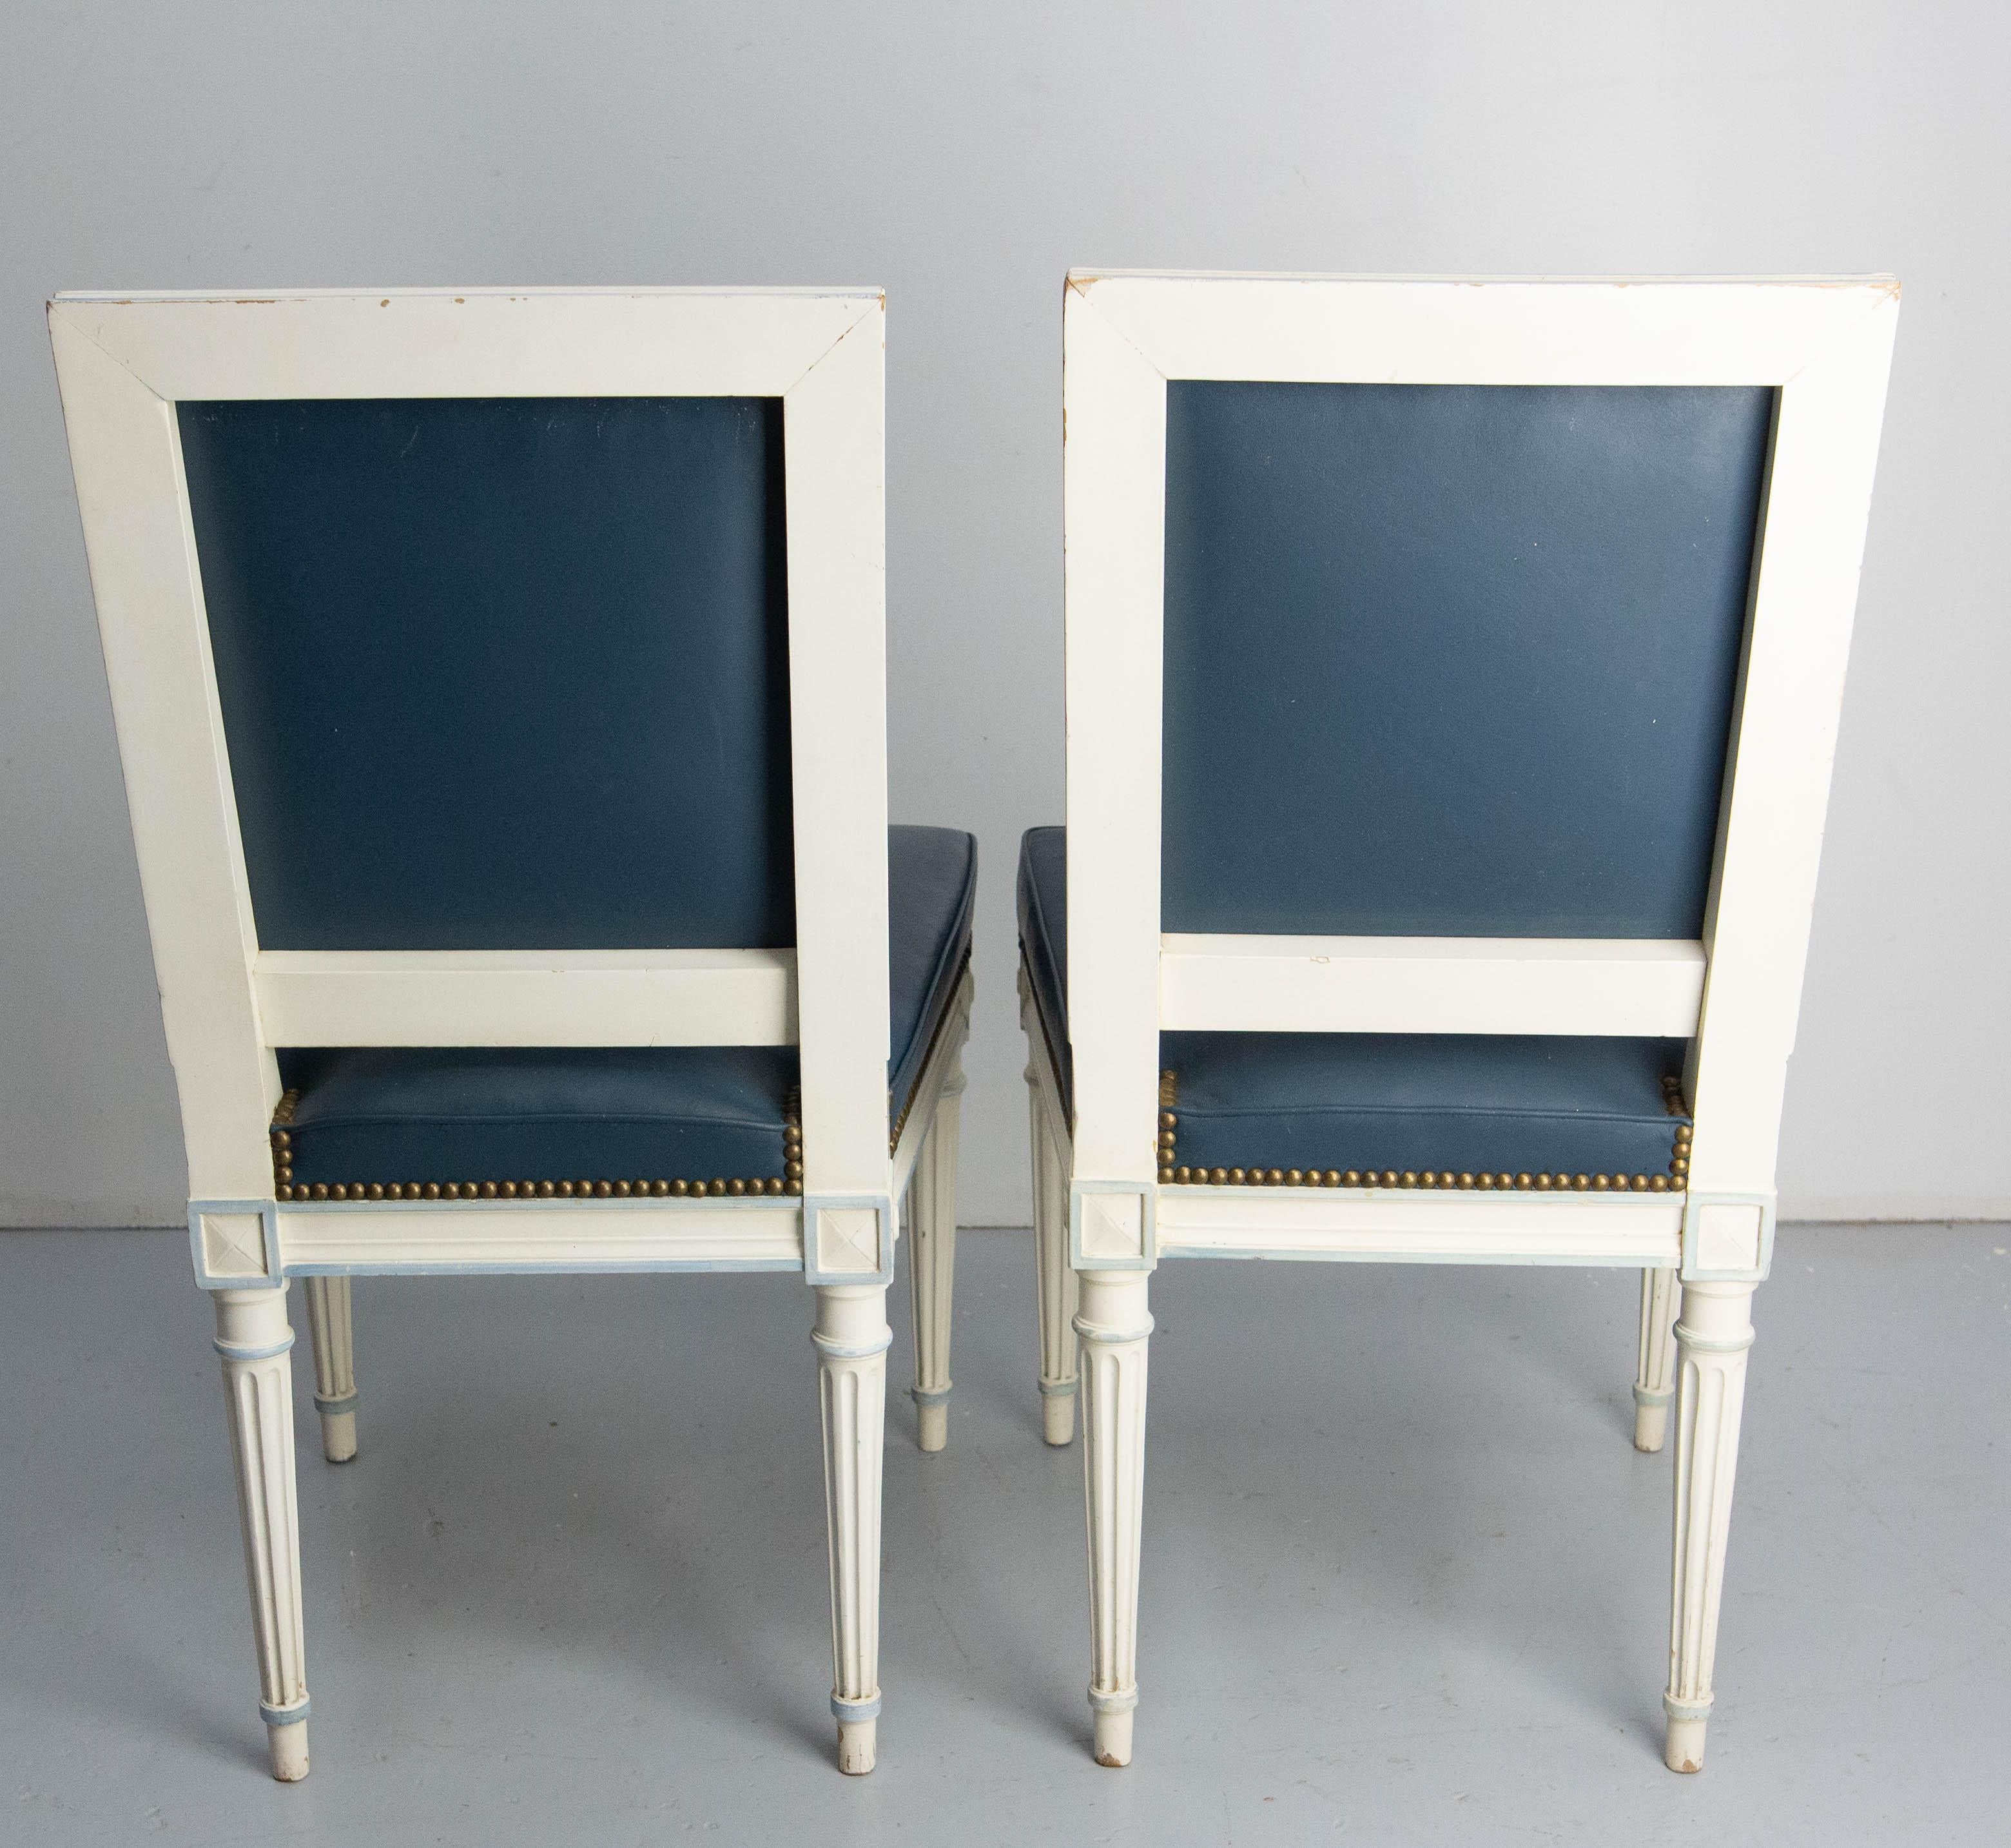 Six Dining Chairs Painted Wood & Blue Skai Louis 16 Style, Midcentury French For Sale 3